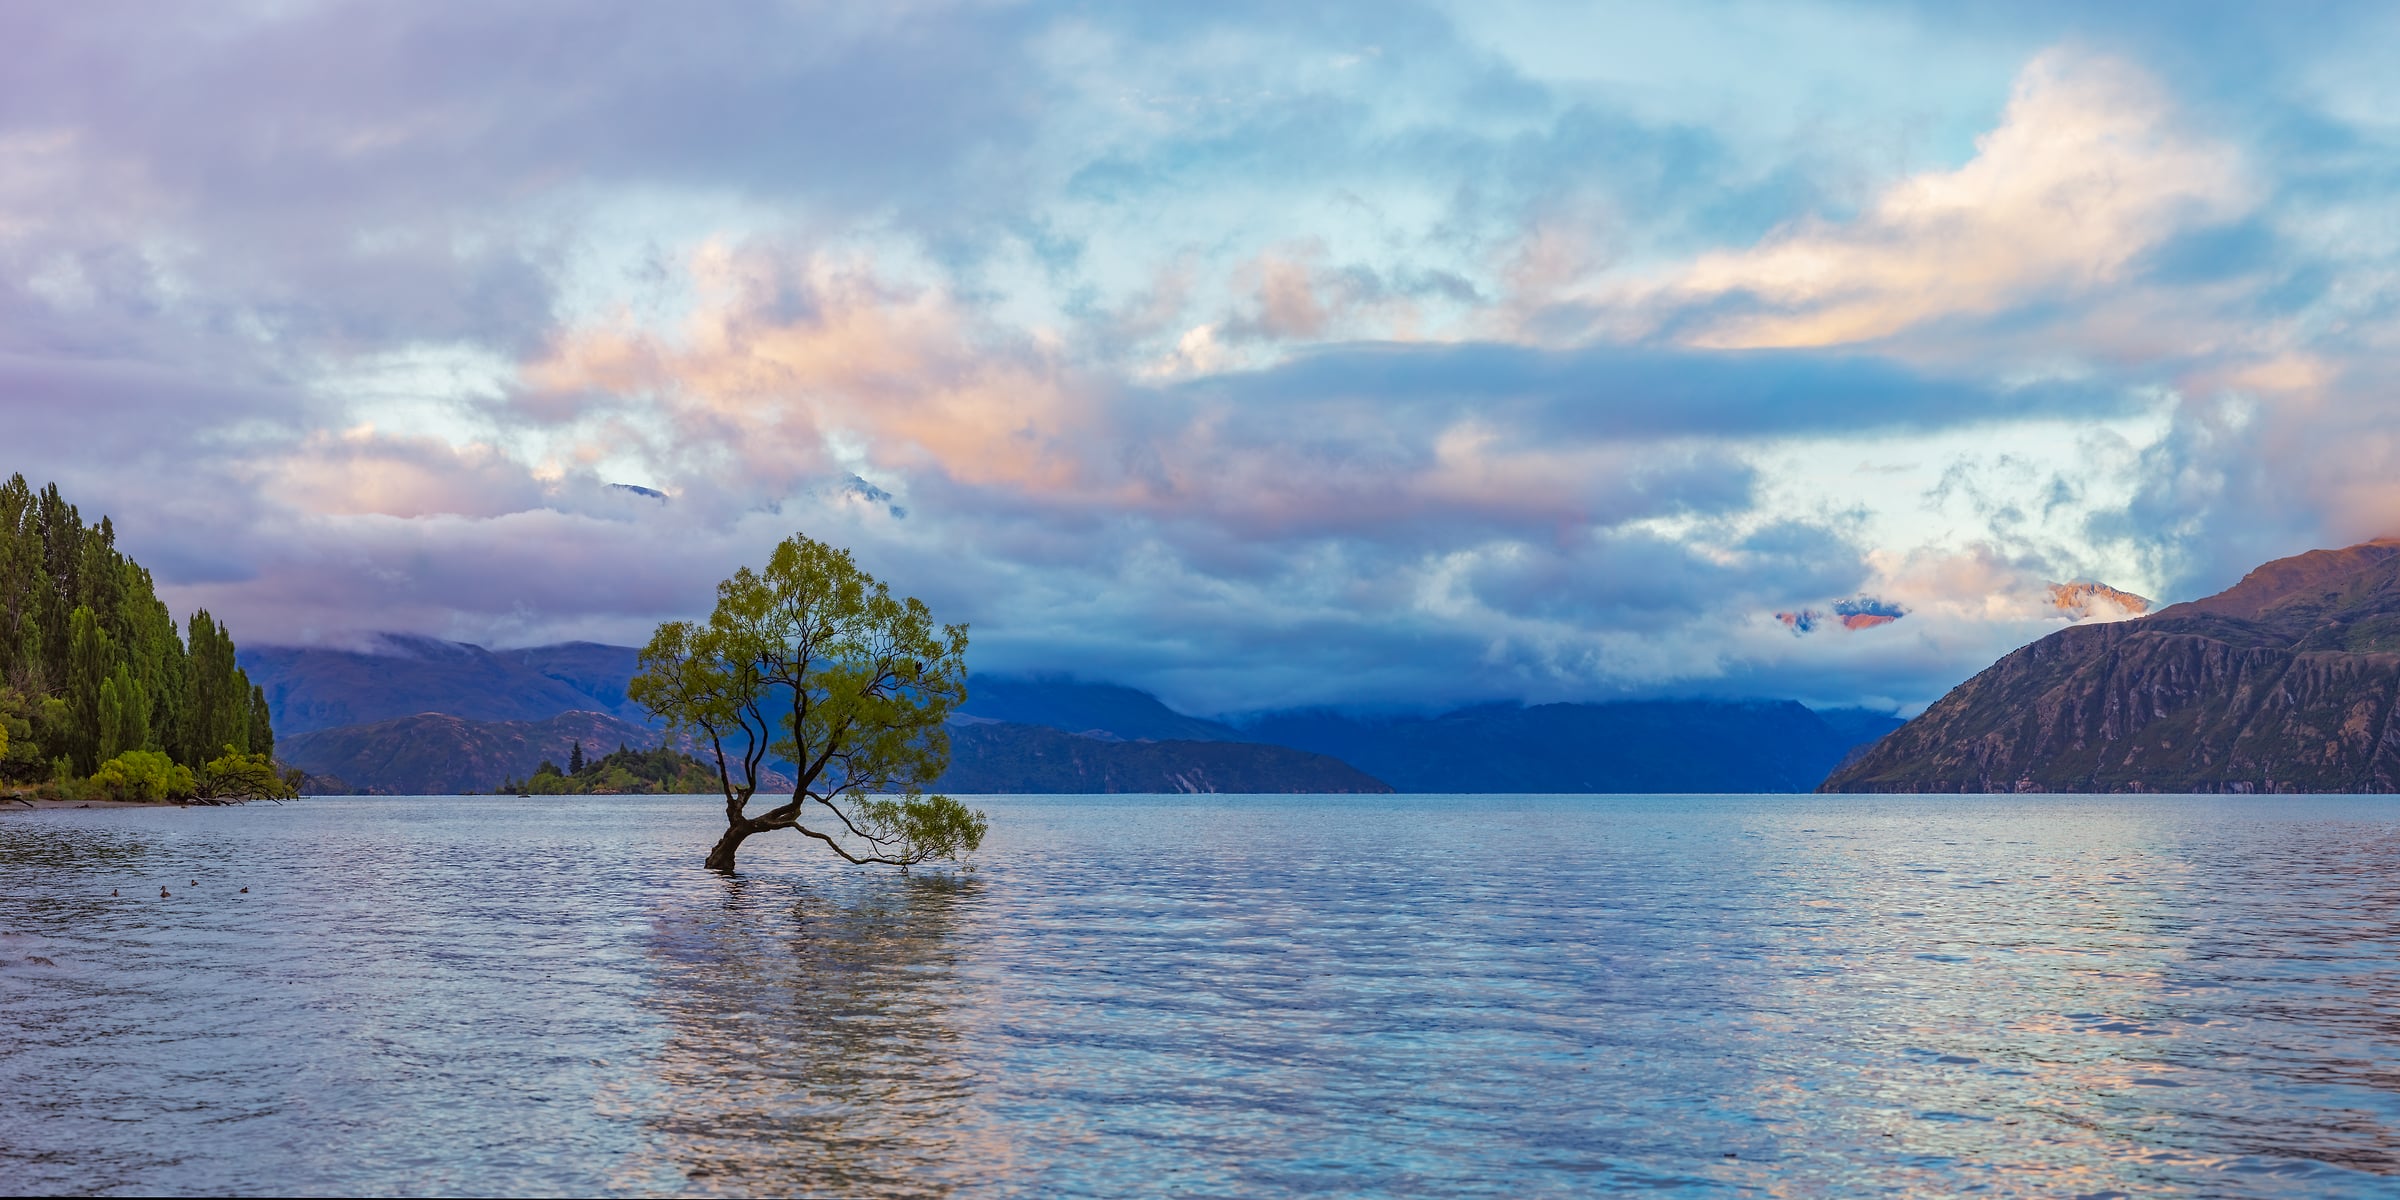 468 megapixels! A very high resolution, large-format VAST photo print of a tree in a lake at sunset; art photograph created by John Freeman in Wanaka Lake, Wanaka, New Zealand